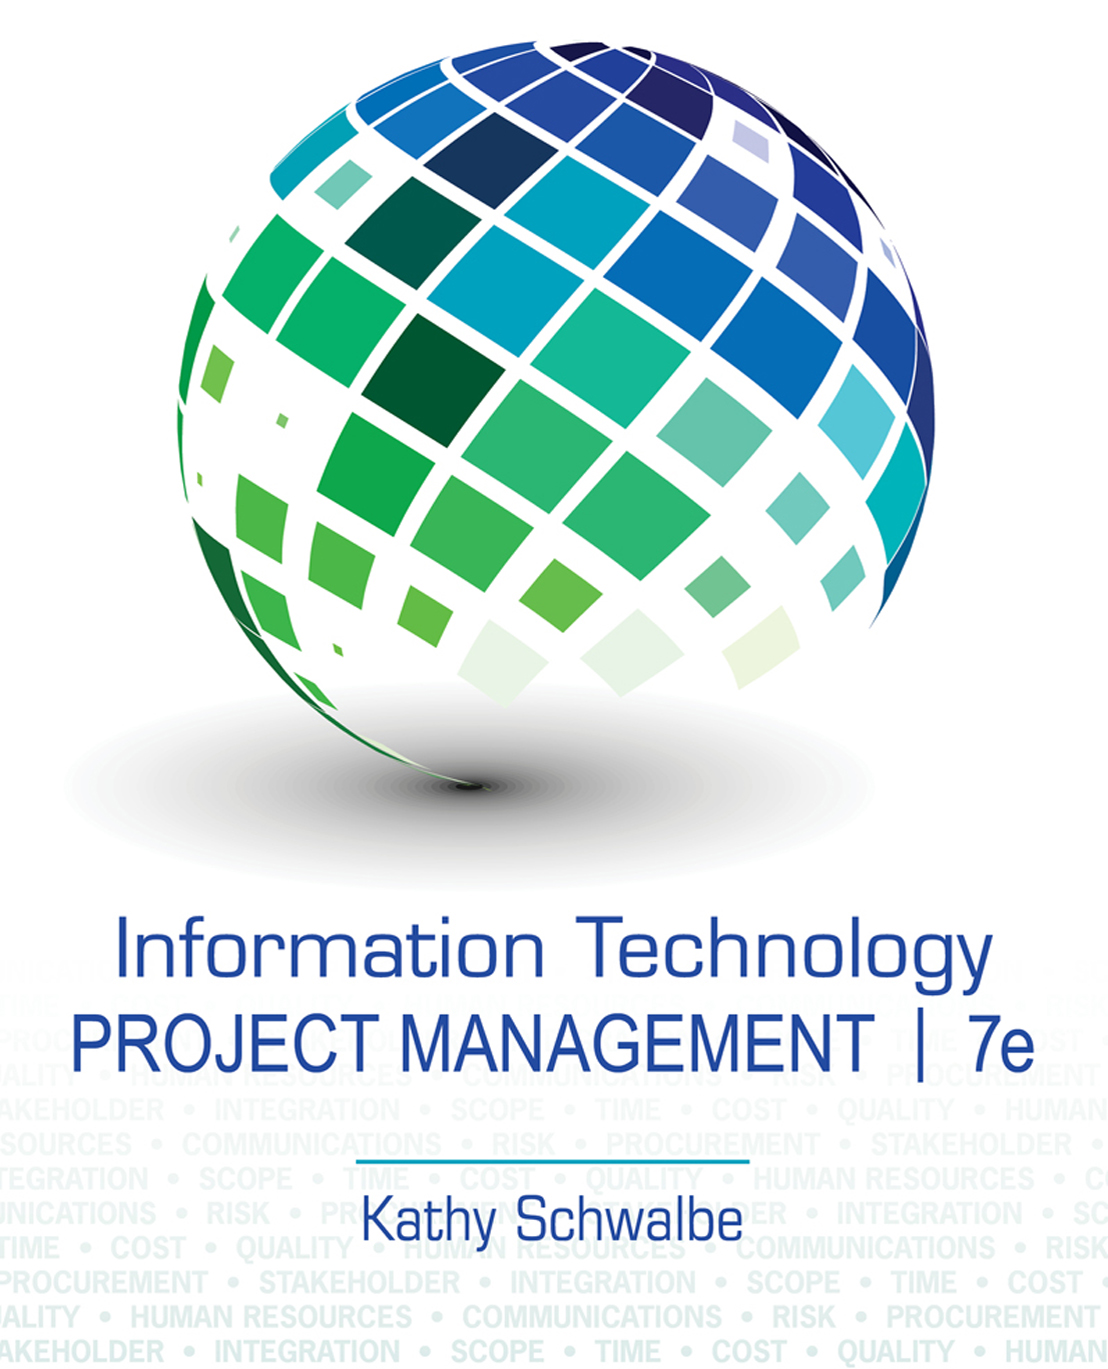 Information Technology Project Management - Kathy S